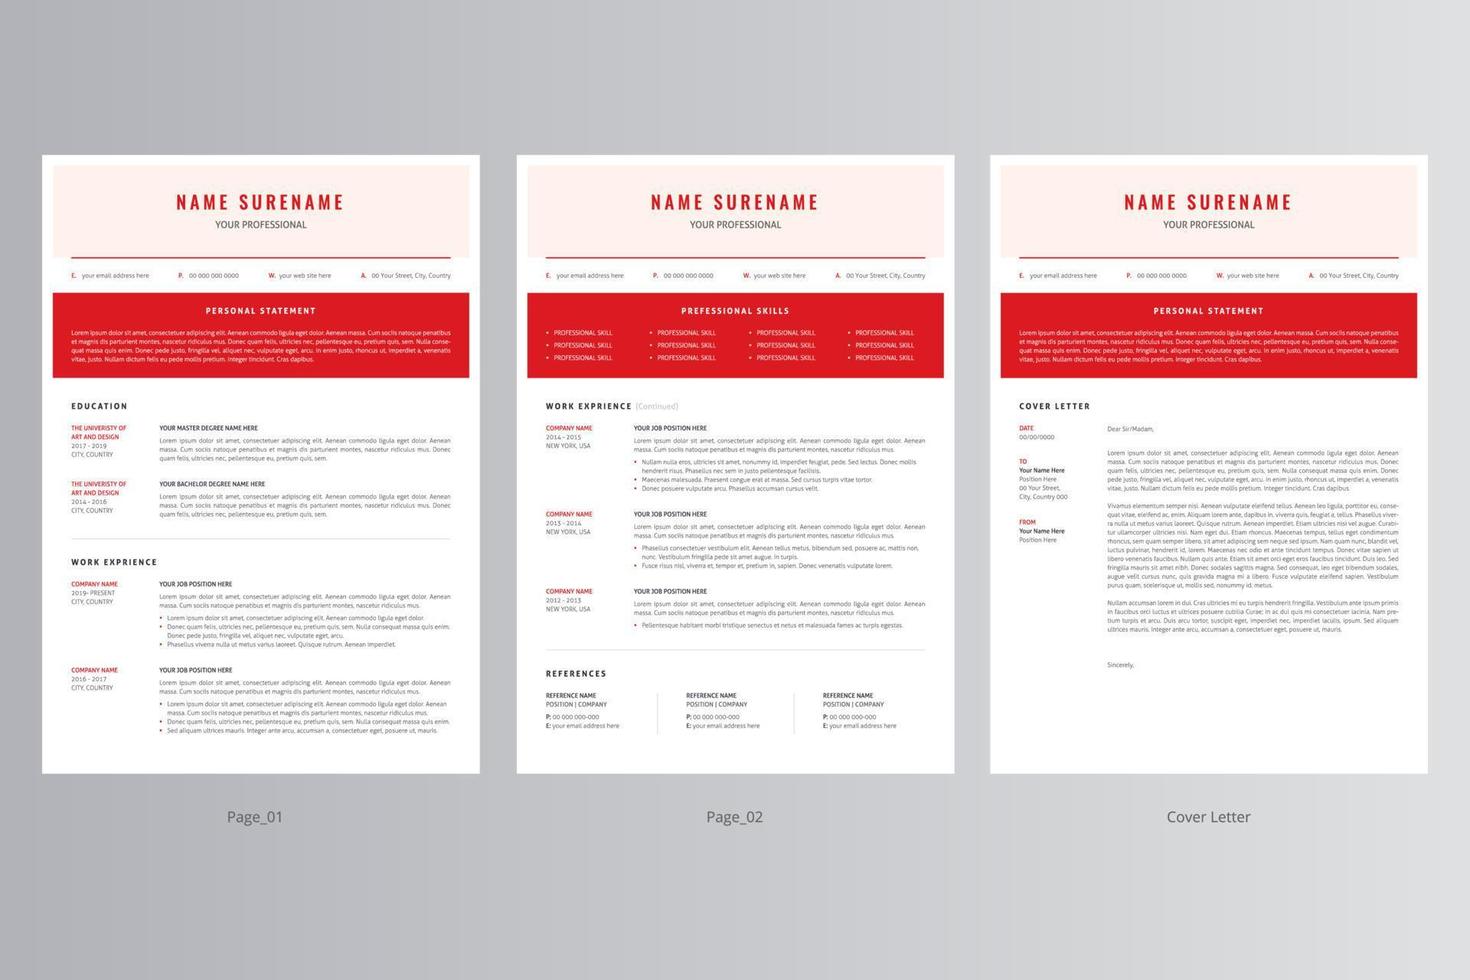 Professional Resume and Cover Letter Template. Pro Vector